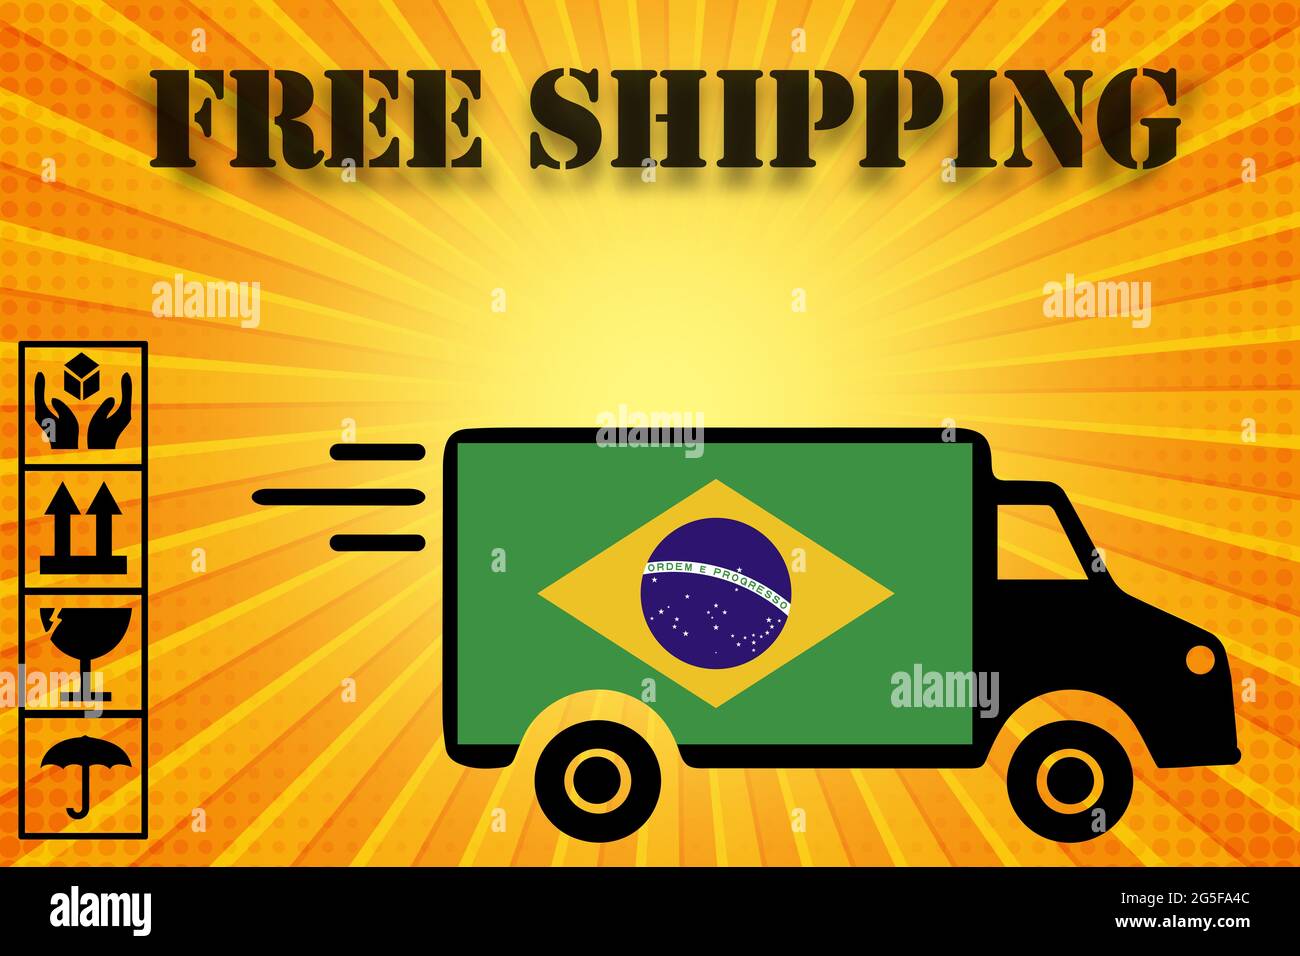 FREE SHIPPING TO BRAZIL